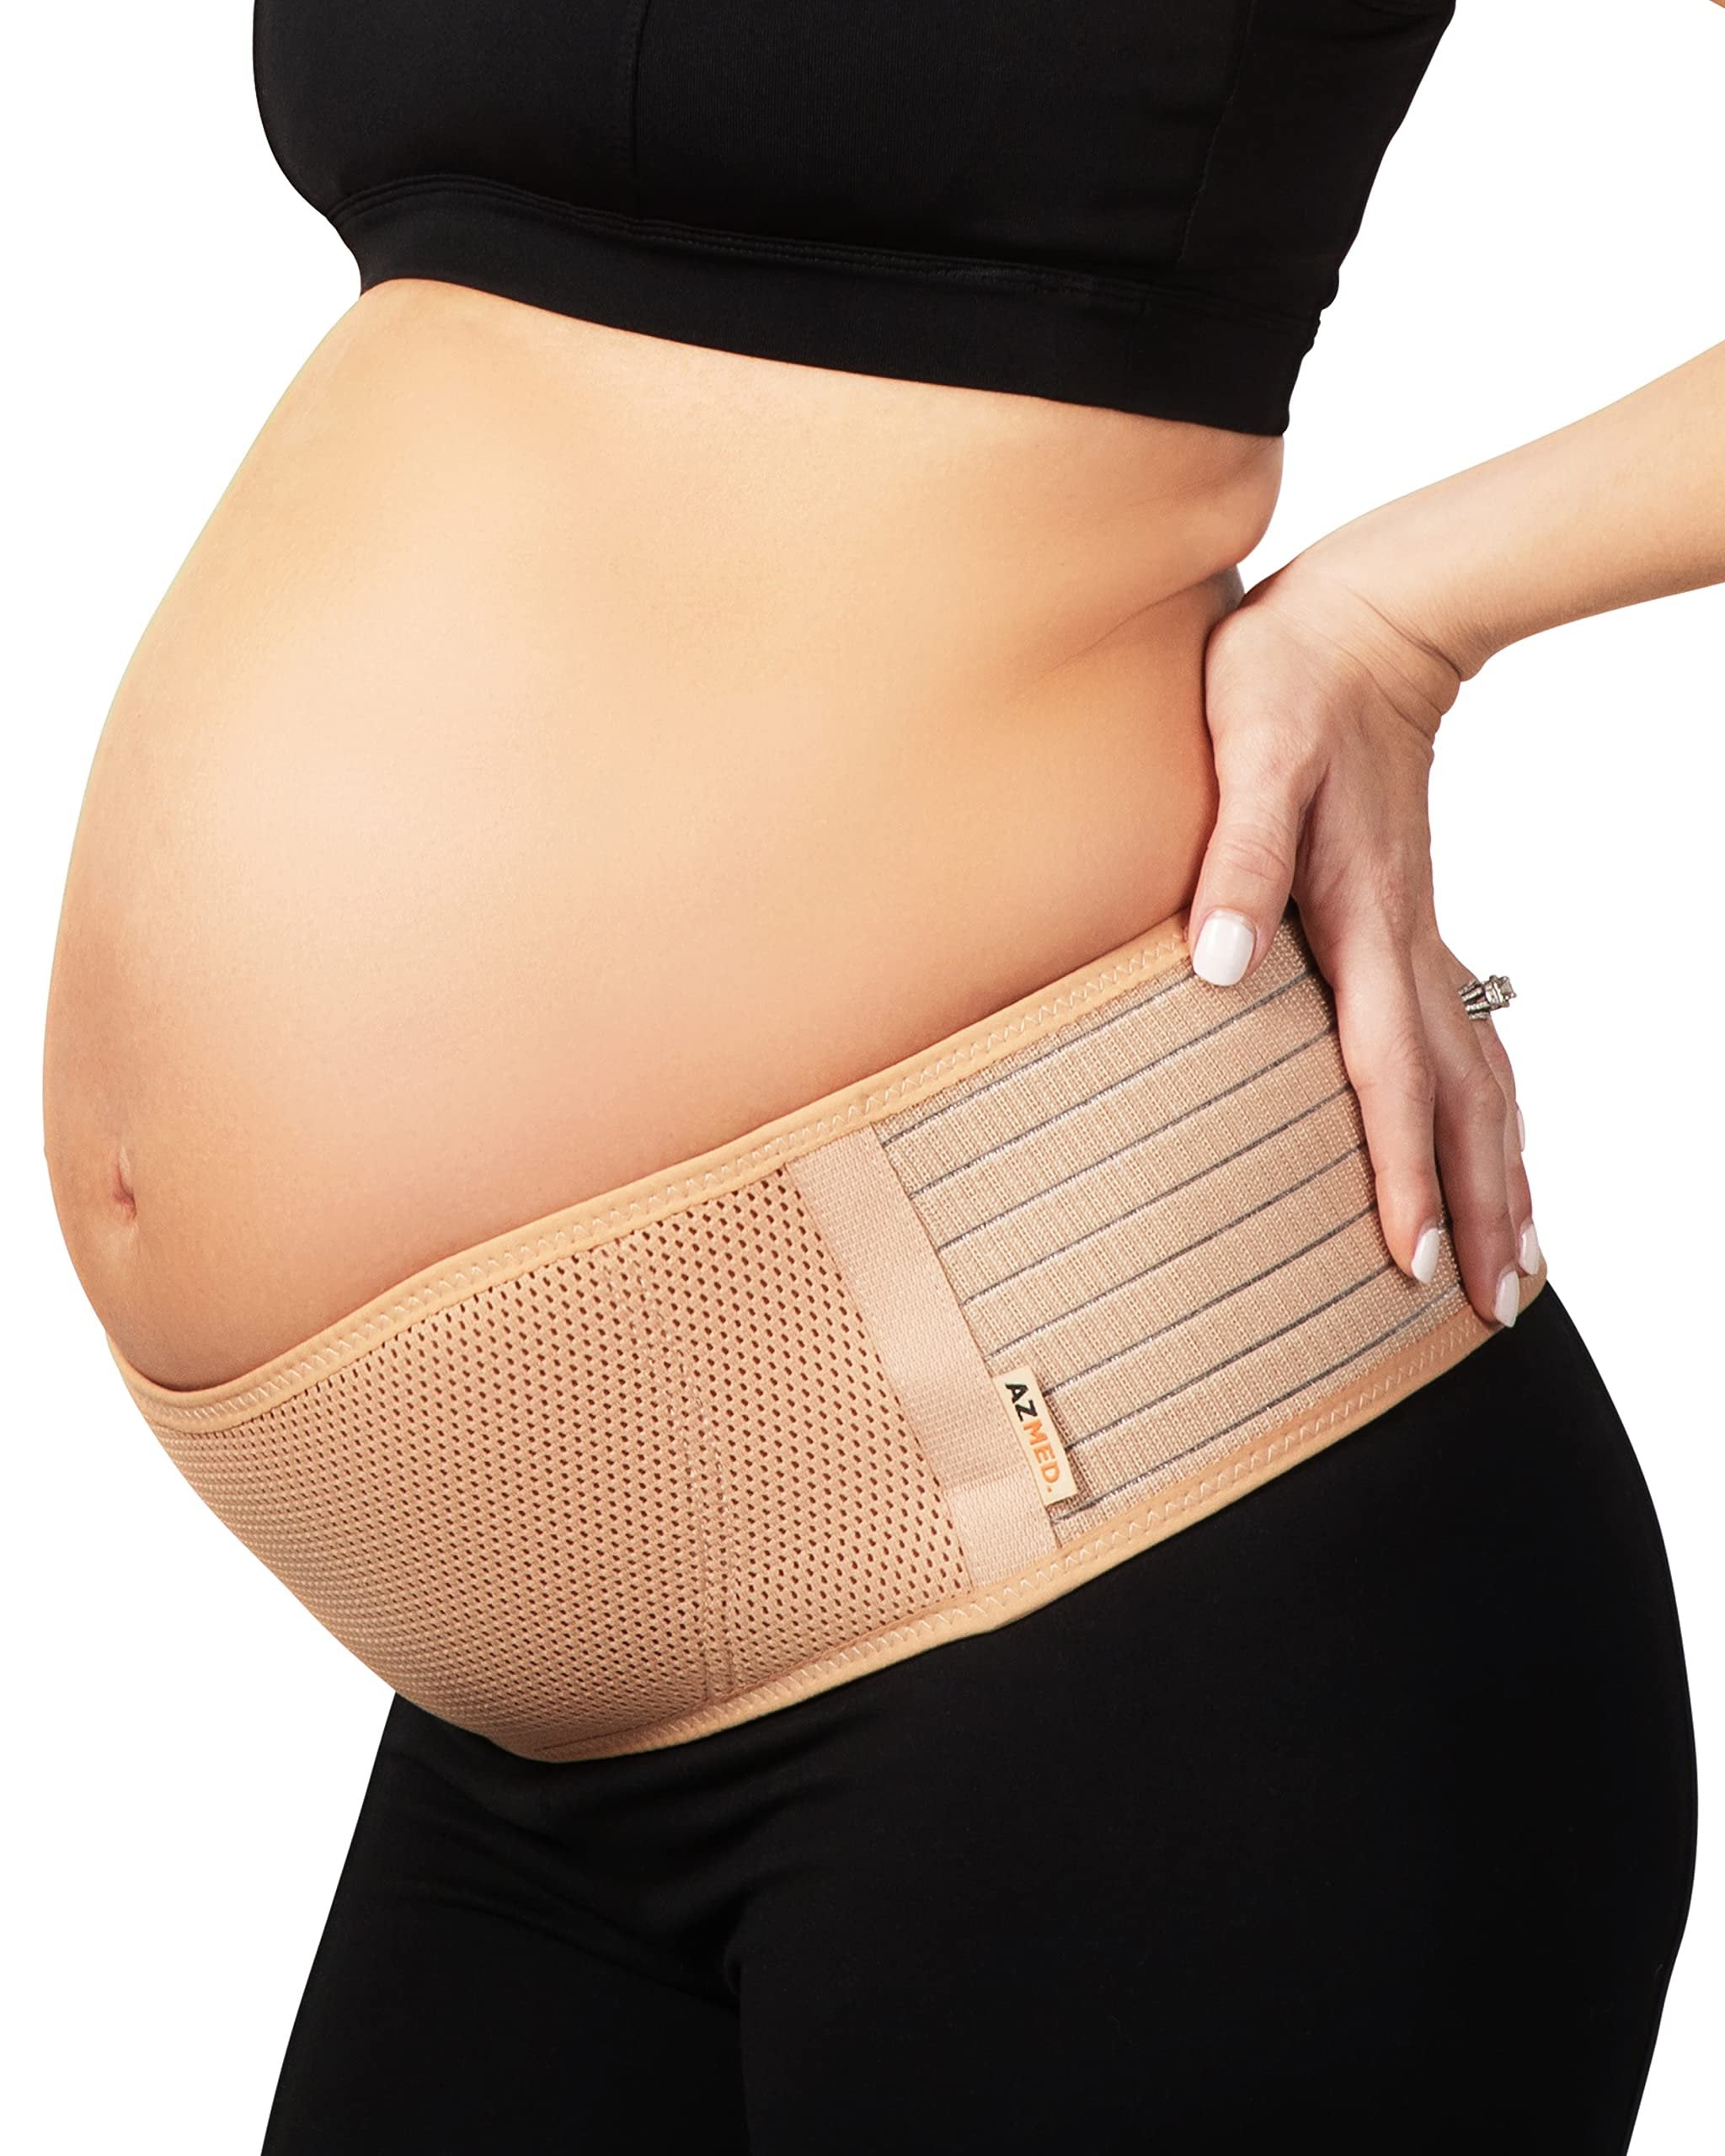 AZMED Maternity Belly Band | Adjustable Belt for All Stages of Pregnancy & Postpartum | Beige Support for Abdomen, Pelvic, Waist & Back Pain | Size [insert size] | Free Shipping & Returns